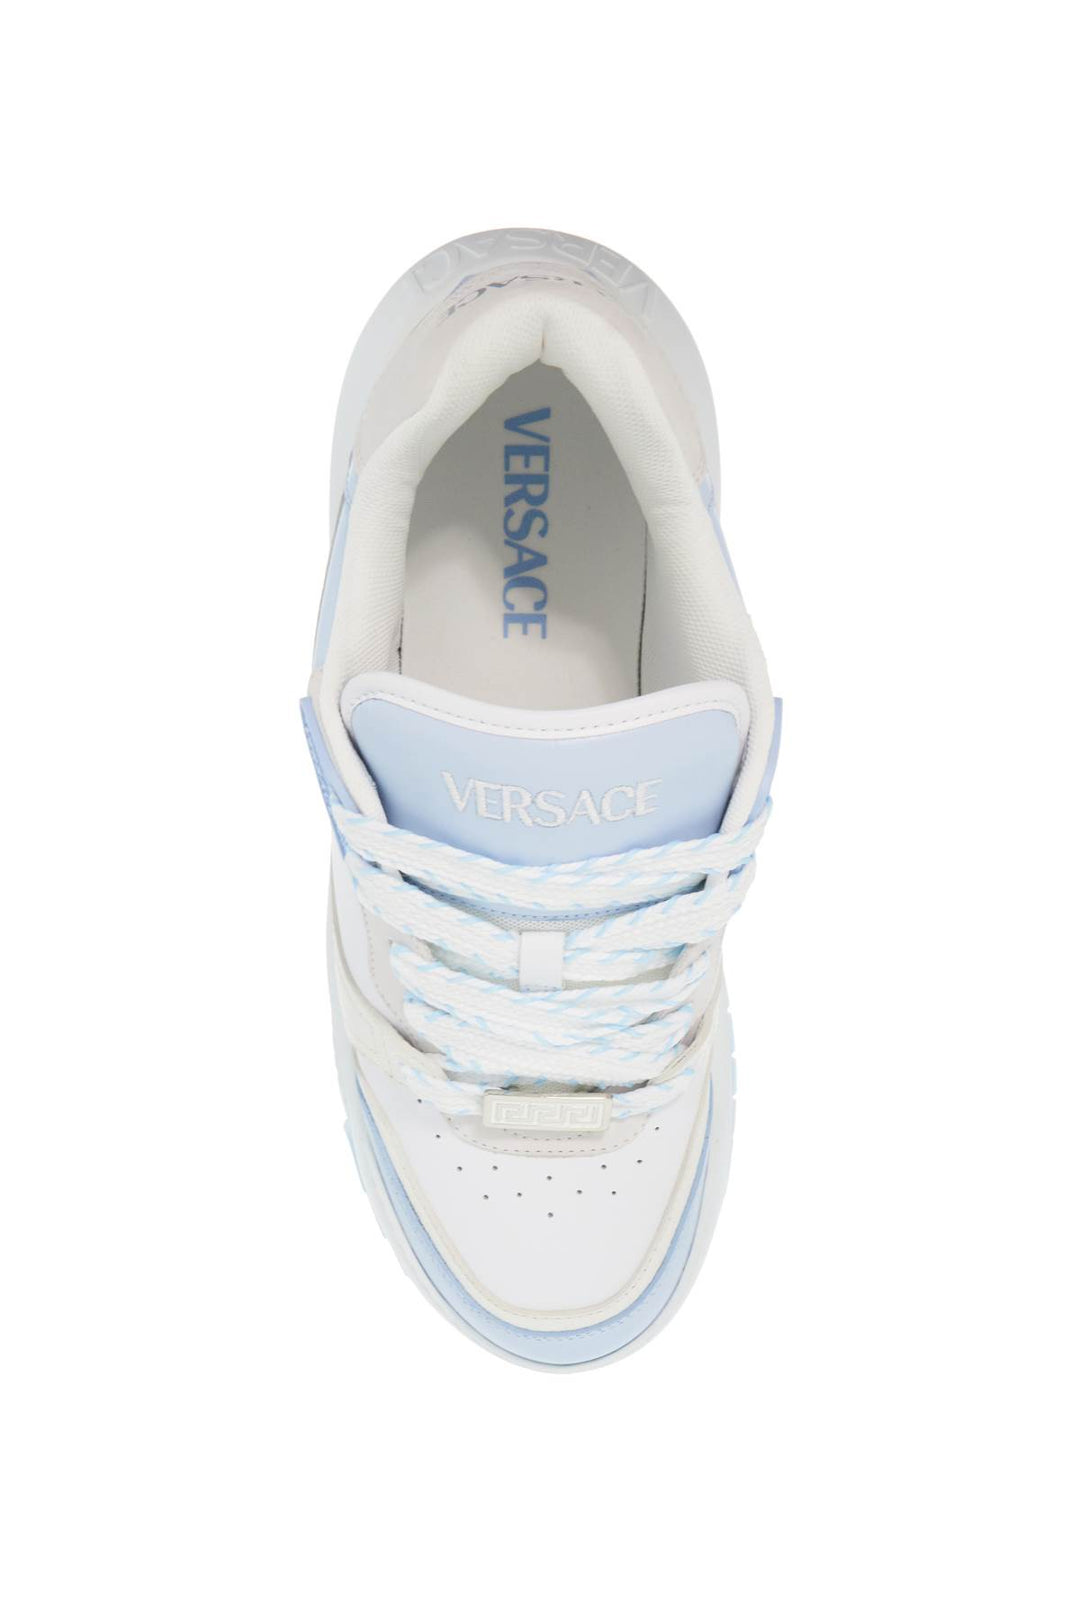 Versace Odyssey Sneakers   White